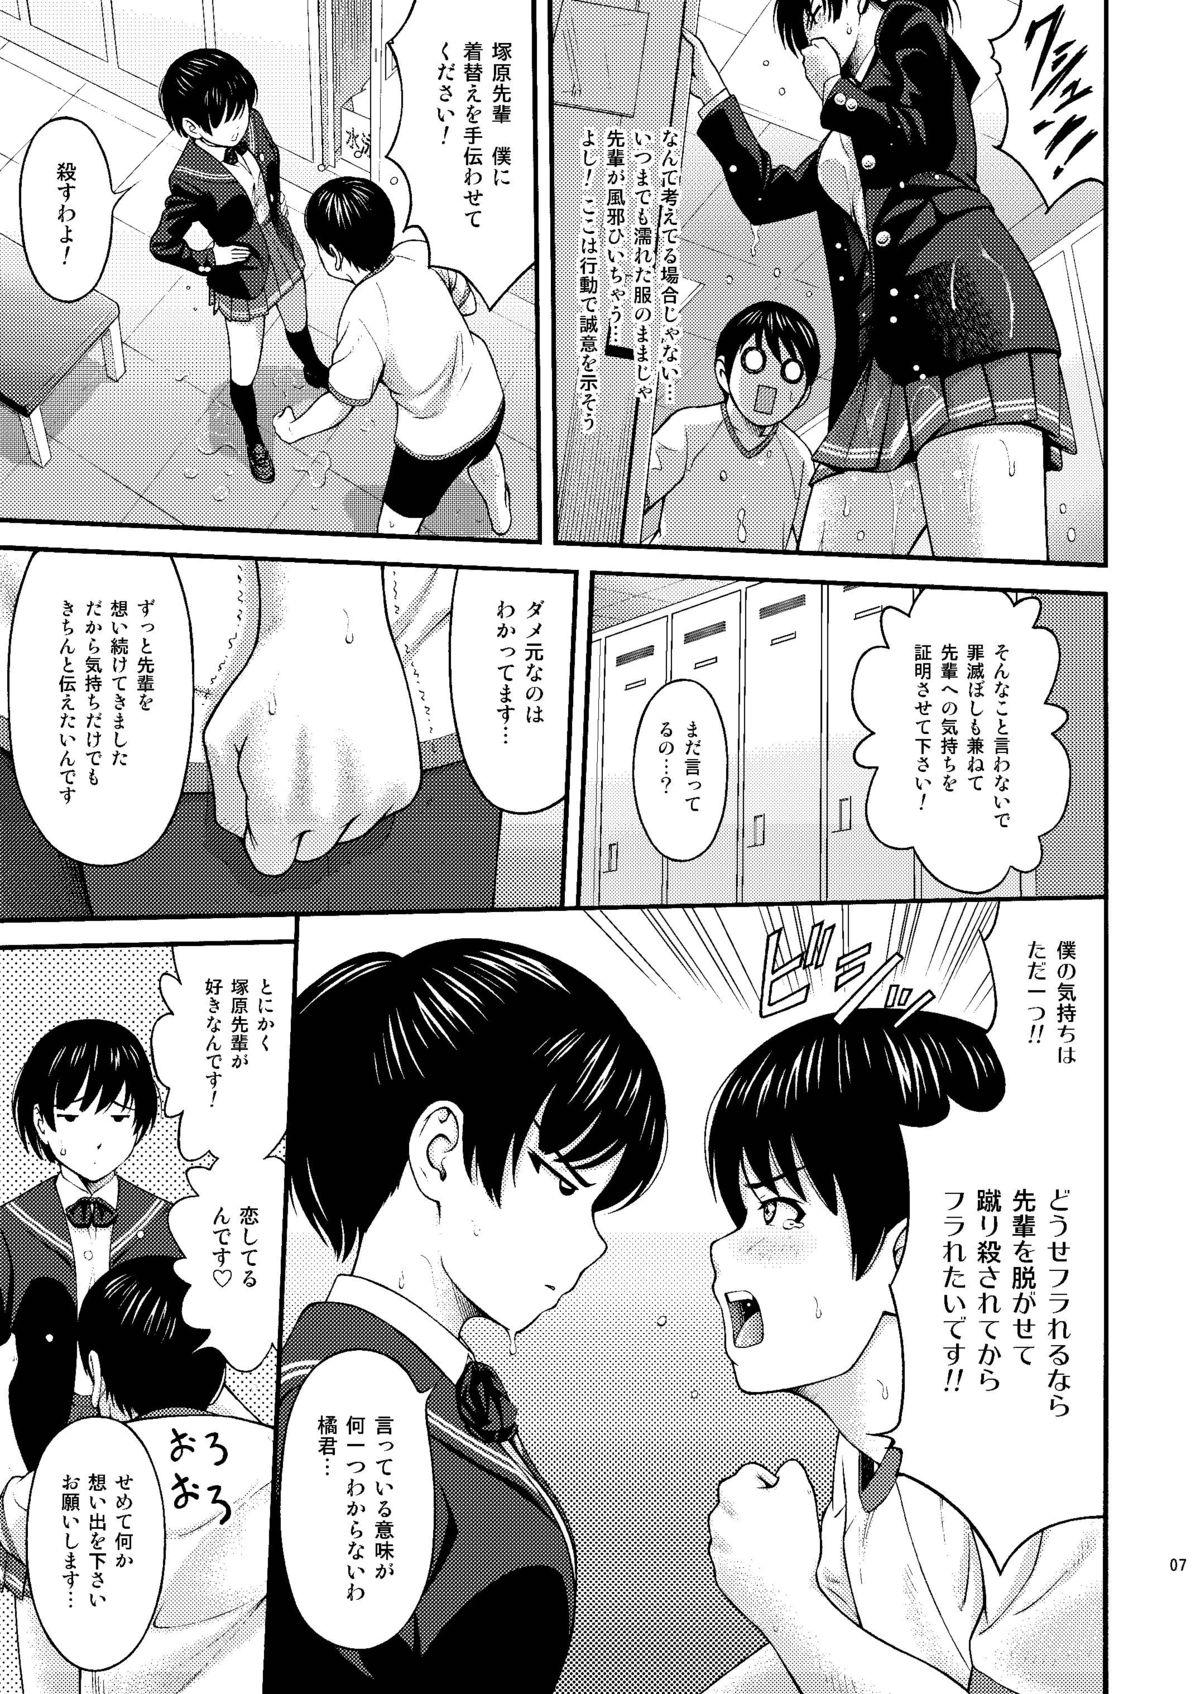 Bed Tsukahara SS＋plus - Amagami Doggy Style - Page 6